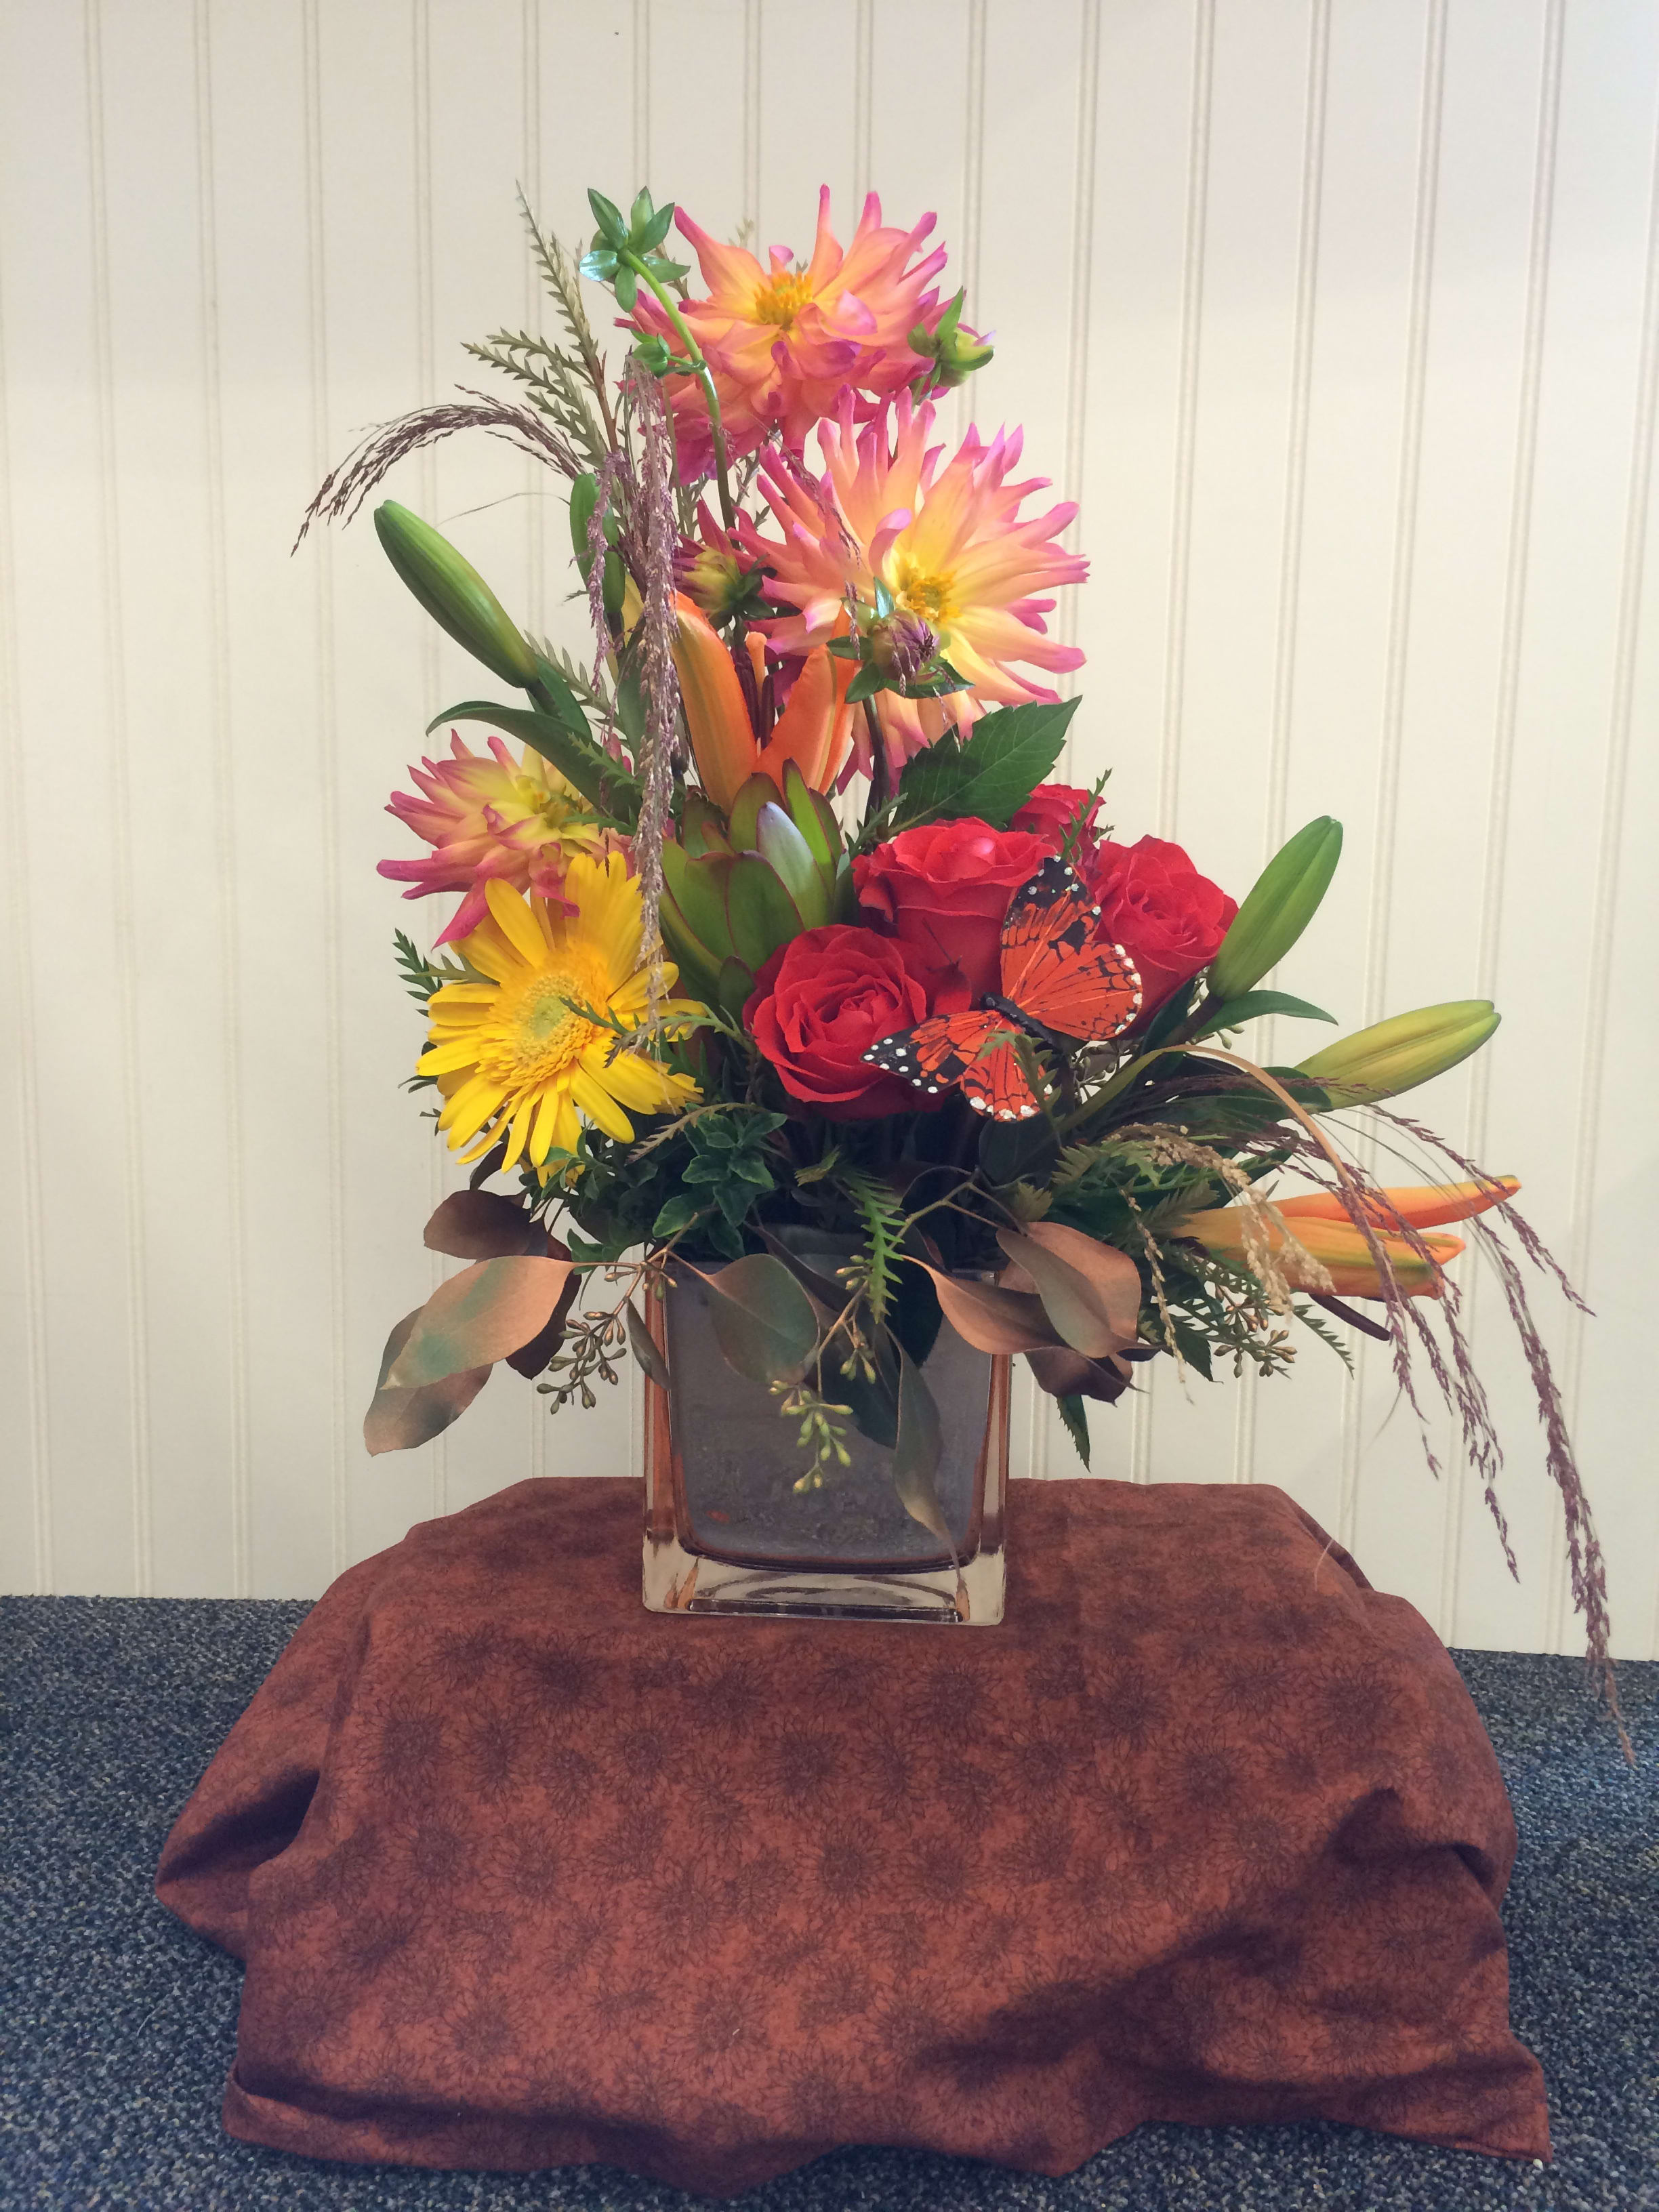 Copper Sensation - A colorful design of dahlias, roses, gerbera daisies, lilies and leucadendron, sure to brighten anyone's day! 